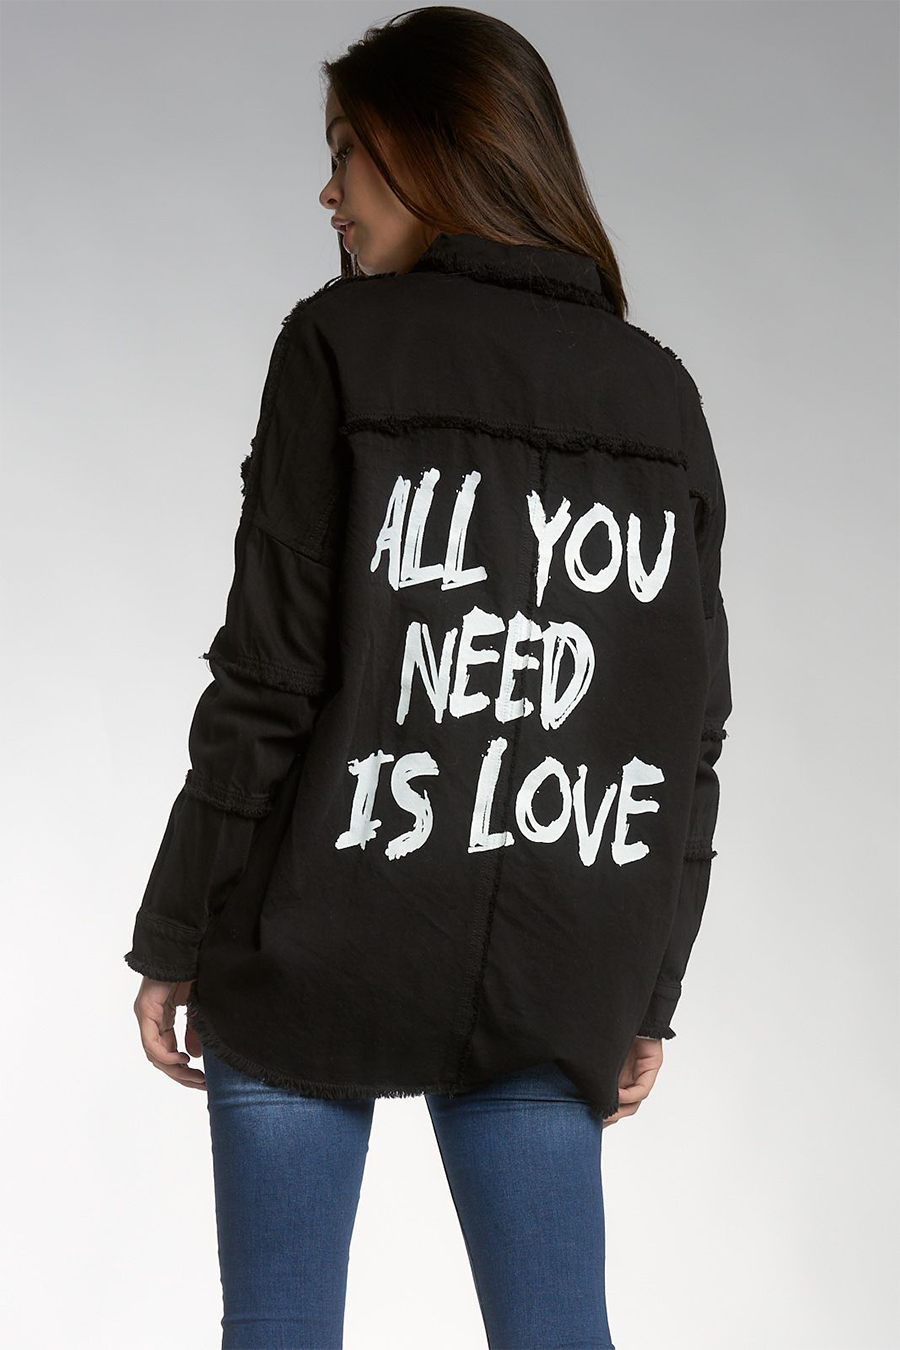 All You Need Is Love Jacket | Black - Main Image Number 1 of 2